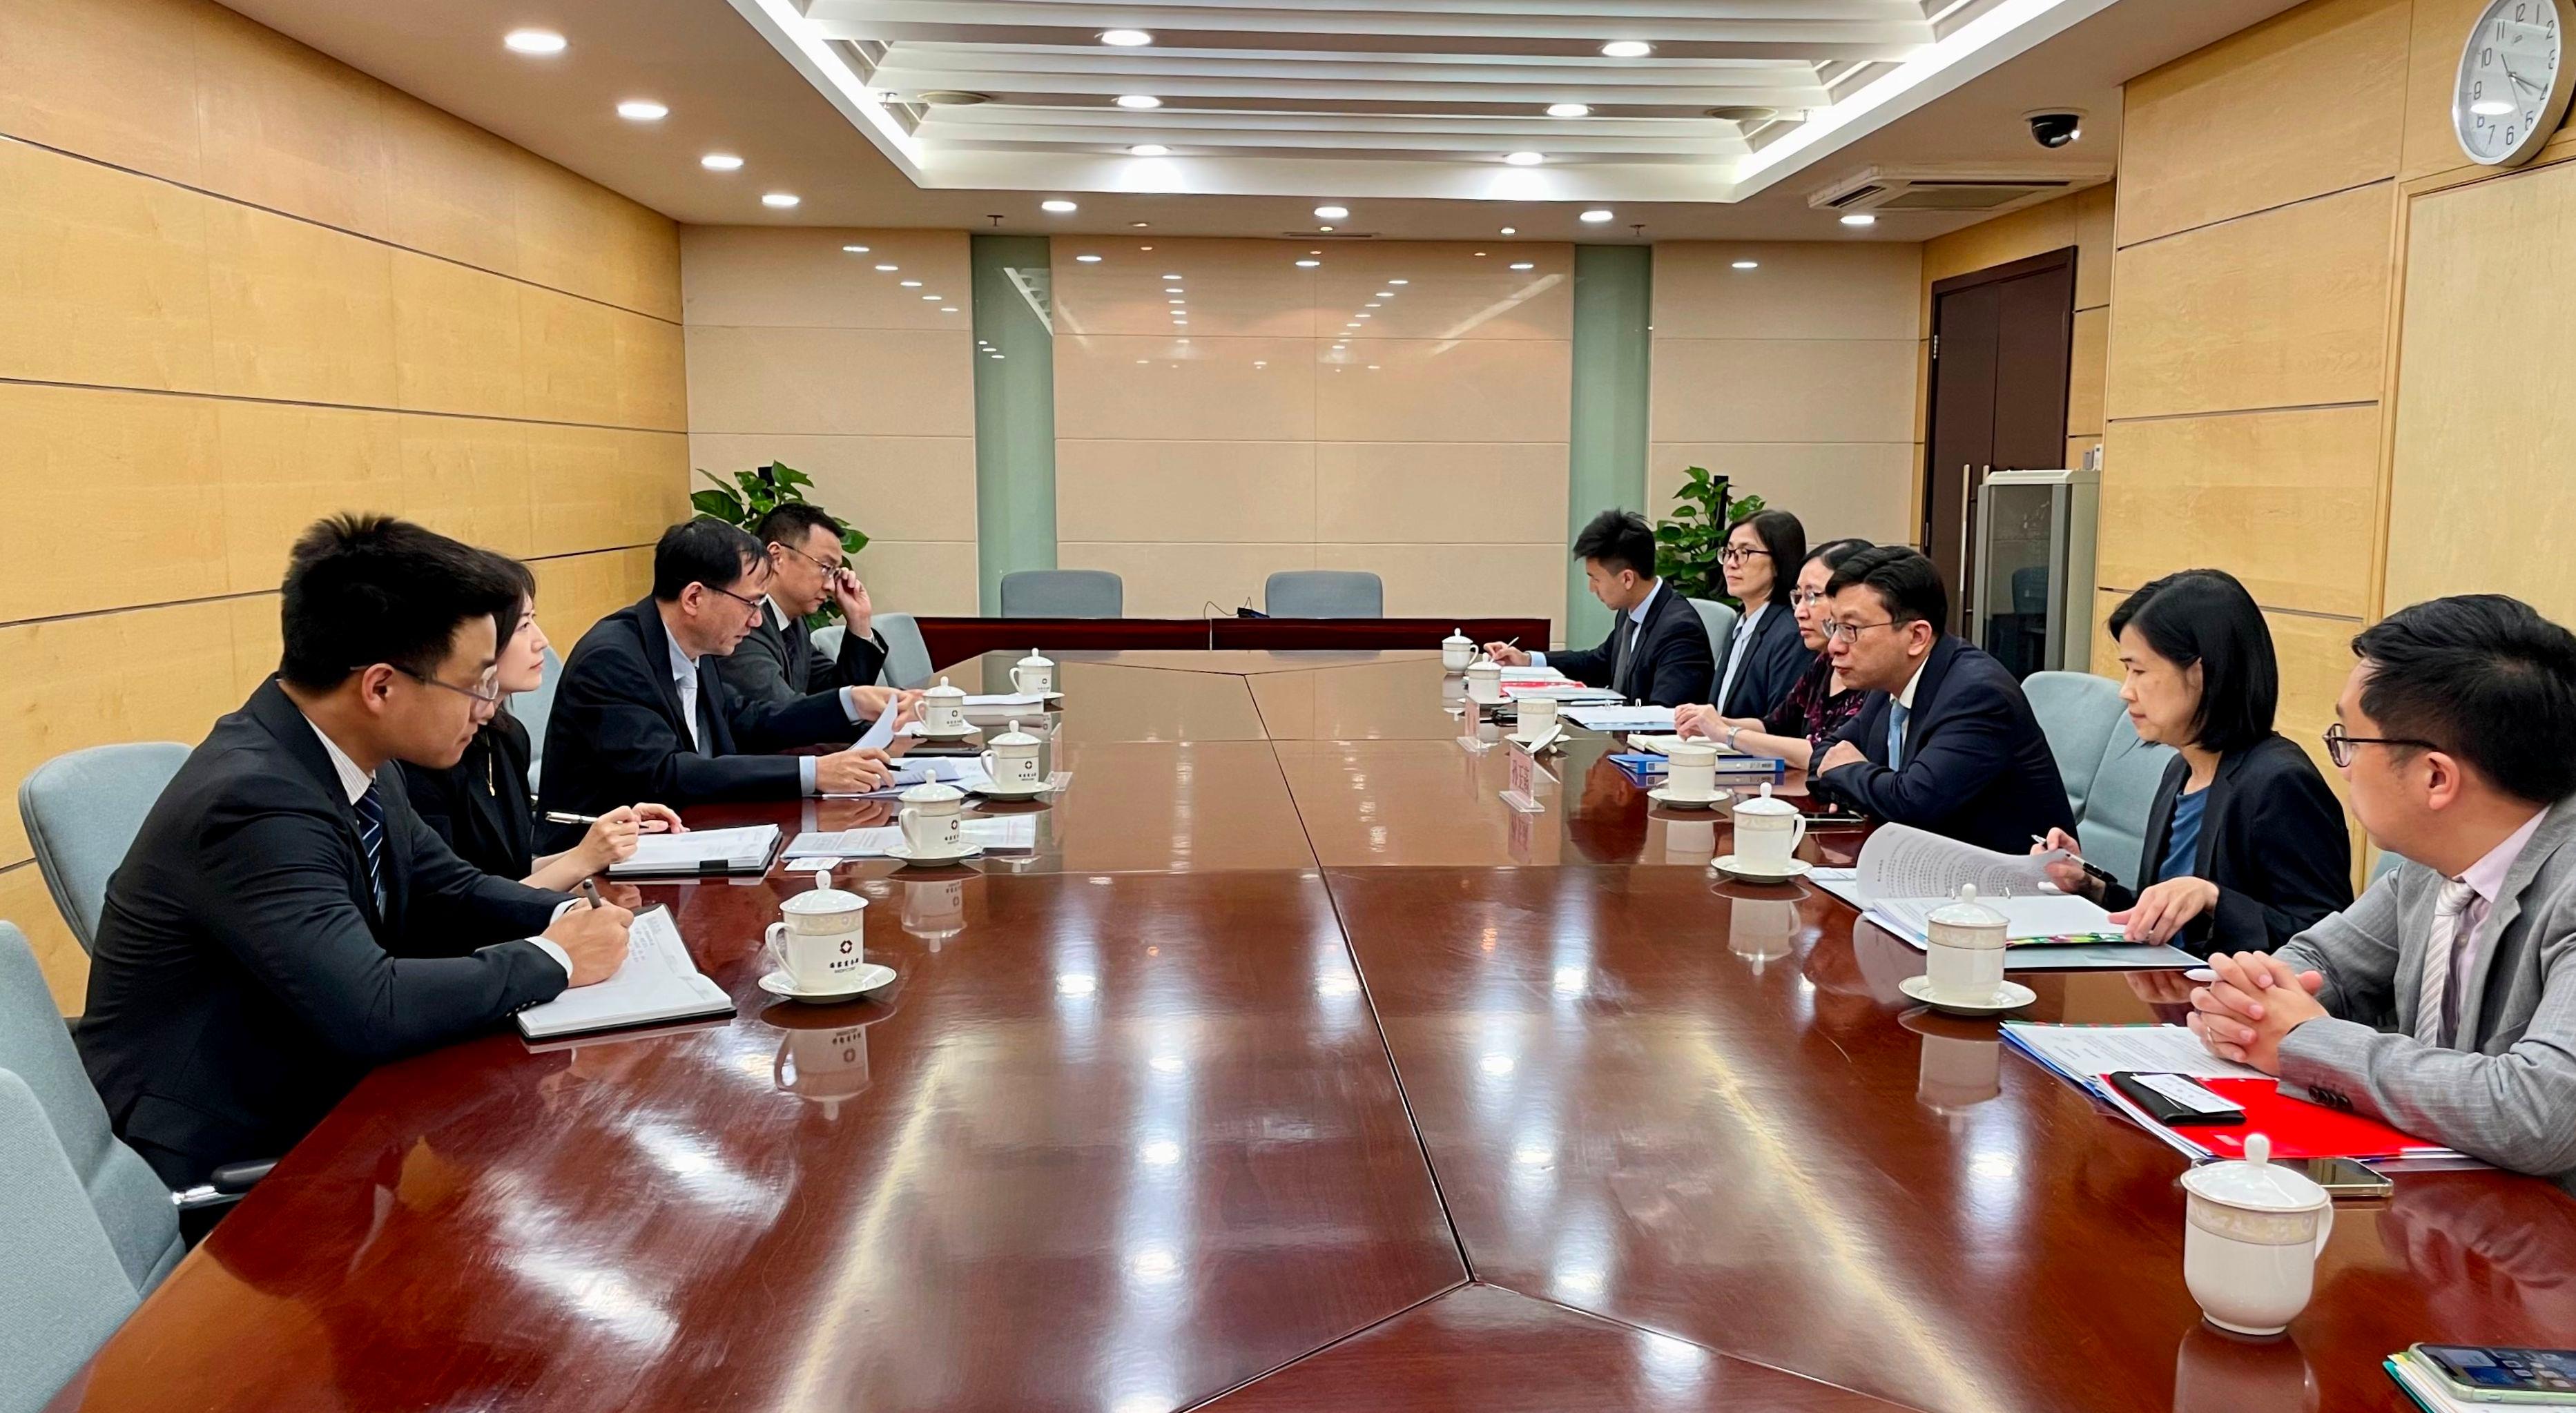 The Secretary for Labour and Welfare, Mr Chris Sun, today (May 8) started his visit in Beijing. The Permanent Secretary for Labour and Welfare, Ms Alice Lau, also joined the visit. Photo shows Mr Sun (third right) calling on the Deputy Director General of the Department of Outward Investment and Economic Cooperation of the Ministry of Commerce, Mr Liu Minqiang (third left), this afternoon to exchange views on the supervision, management and co-operation regarding labour to be imported to Hong Kong.